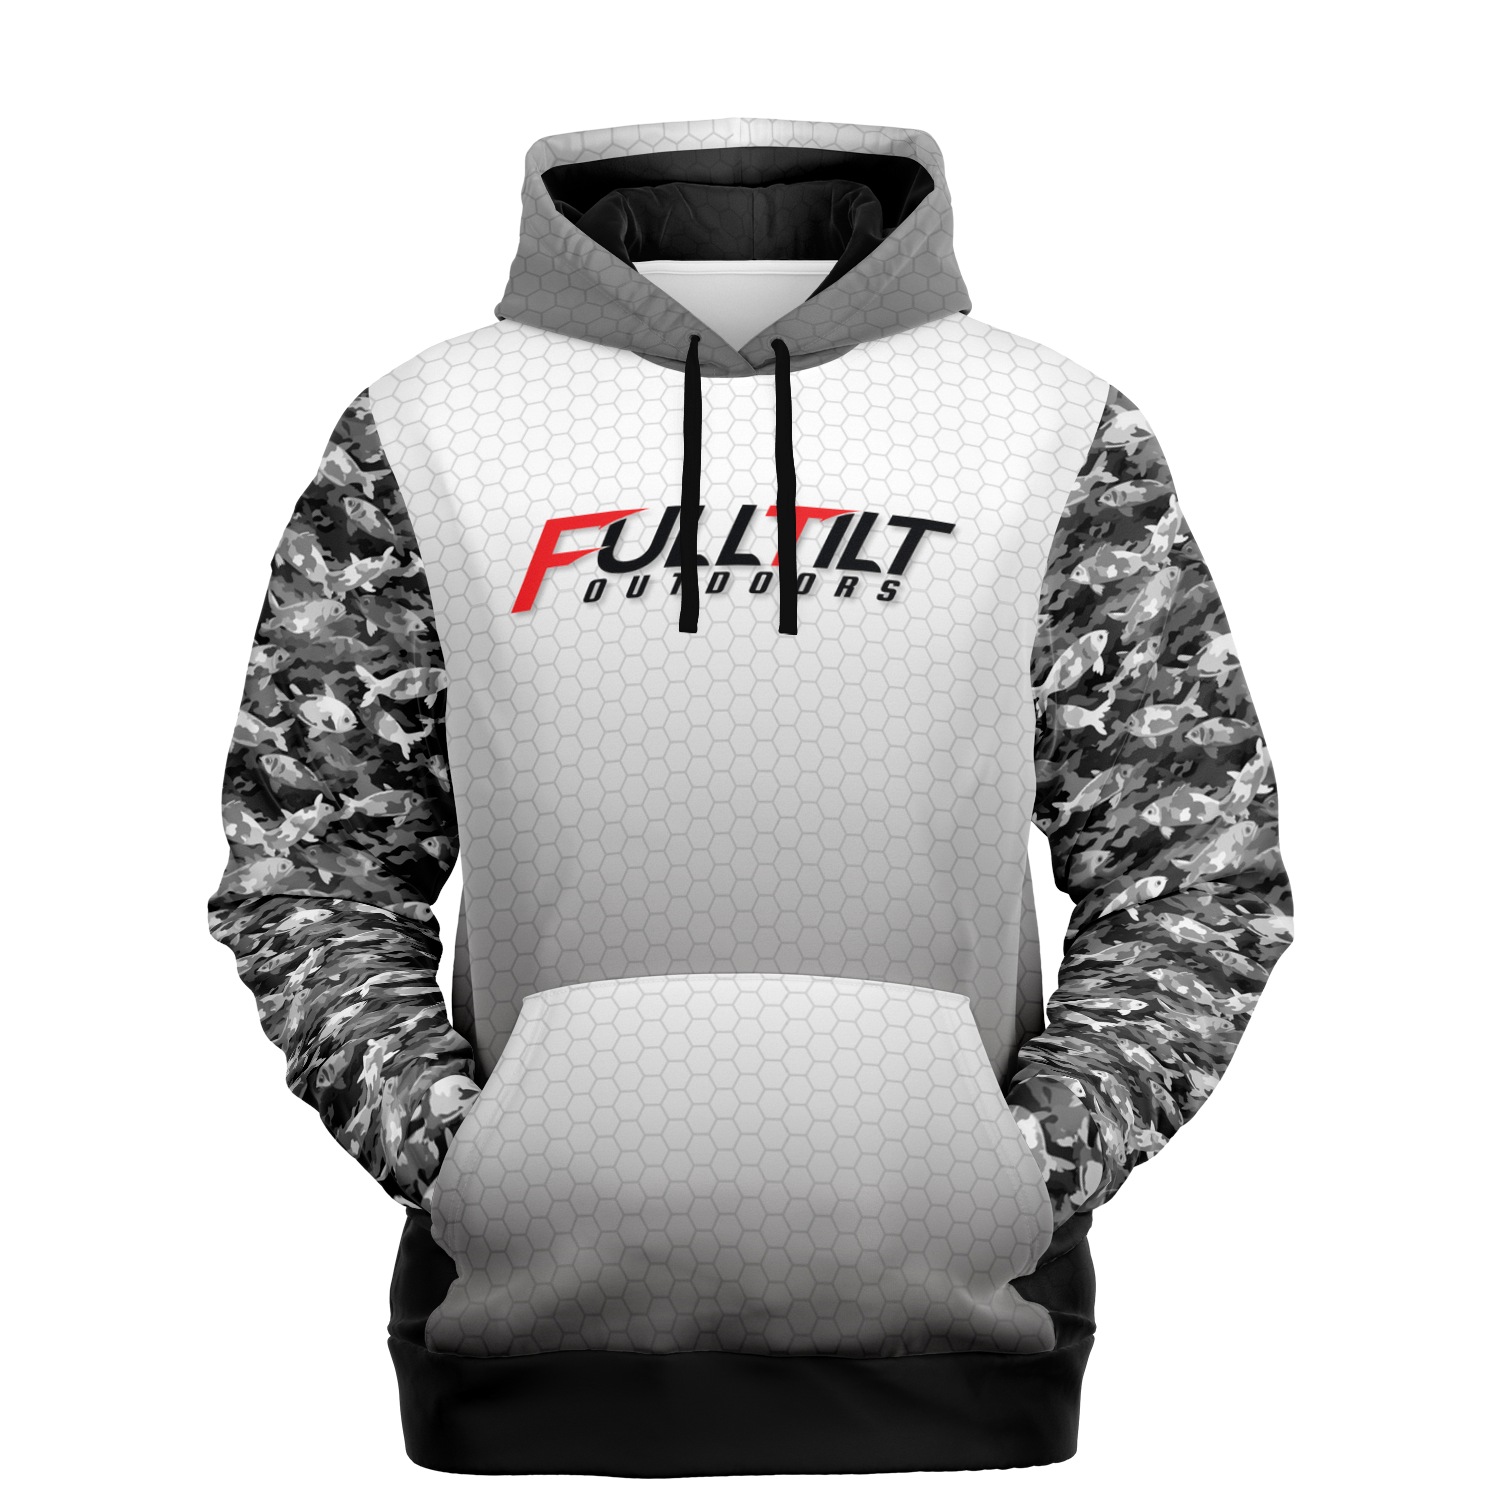 A digital rendering of a Full Tilt Outdoors - Angry Eagle - Tri-Blend Hoodie featuring a gray camo design with a hexagonal pattern on the lower half and the "full tilt boats" logo in red and black across the chest.